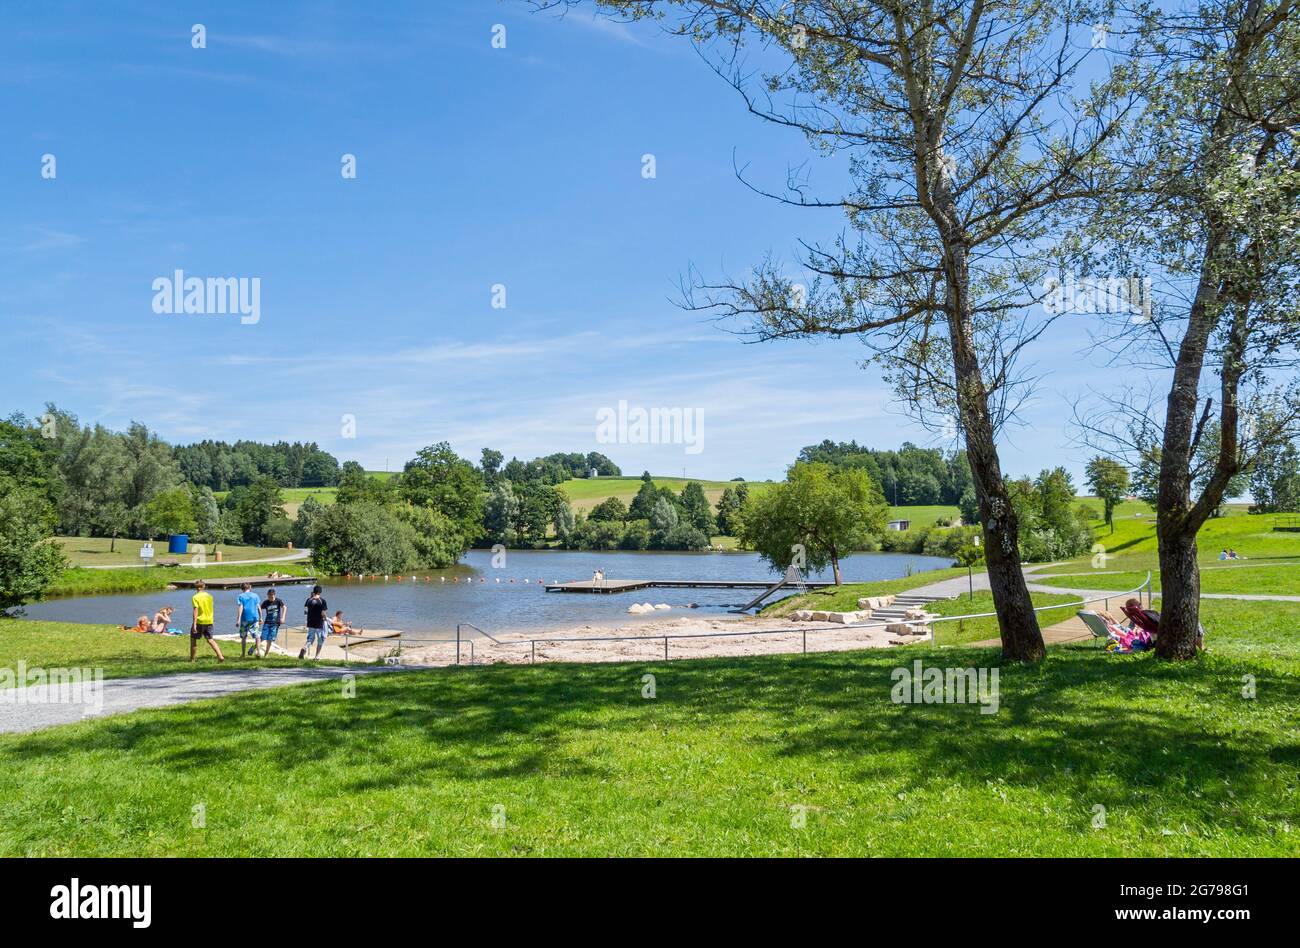 Germany, Baden-Wuerttemberg, Welzheim-Aichstrut, Aichstrut flood retention basin, Aichstruter reservoir, bathing area with sunbathing area. Excursion destination, local recreation area in the Welzheimer Forest in the Swabian-Franconian Forest Nature Park. Stock Photo